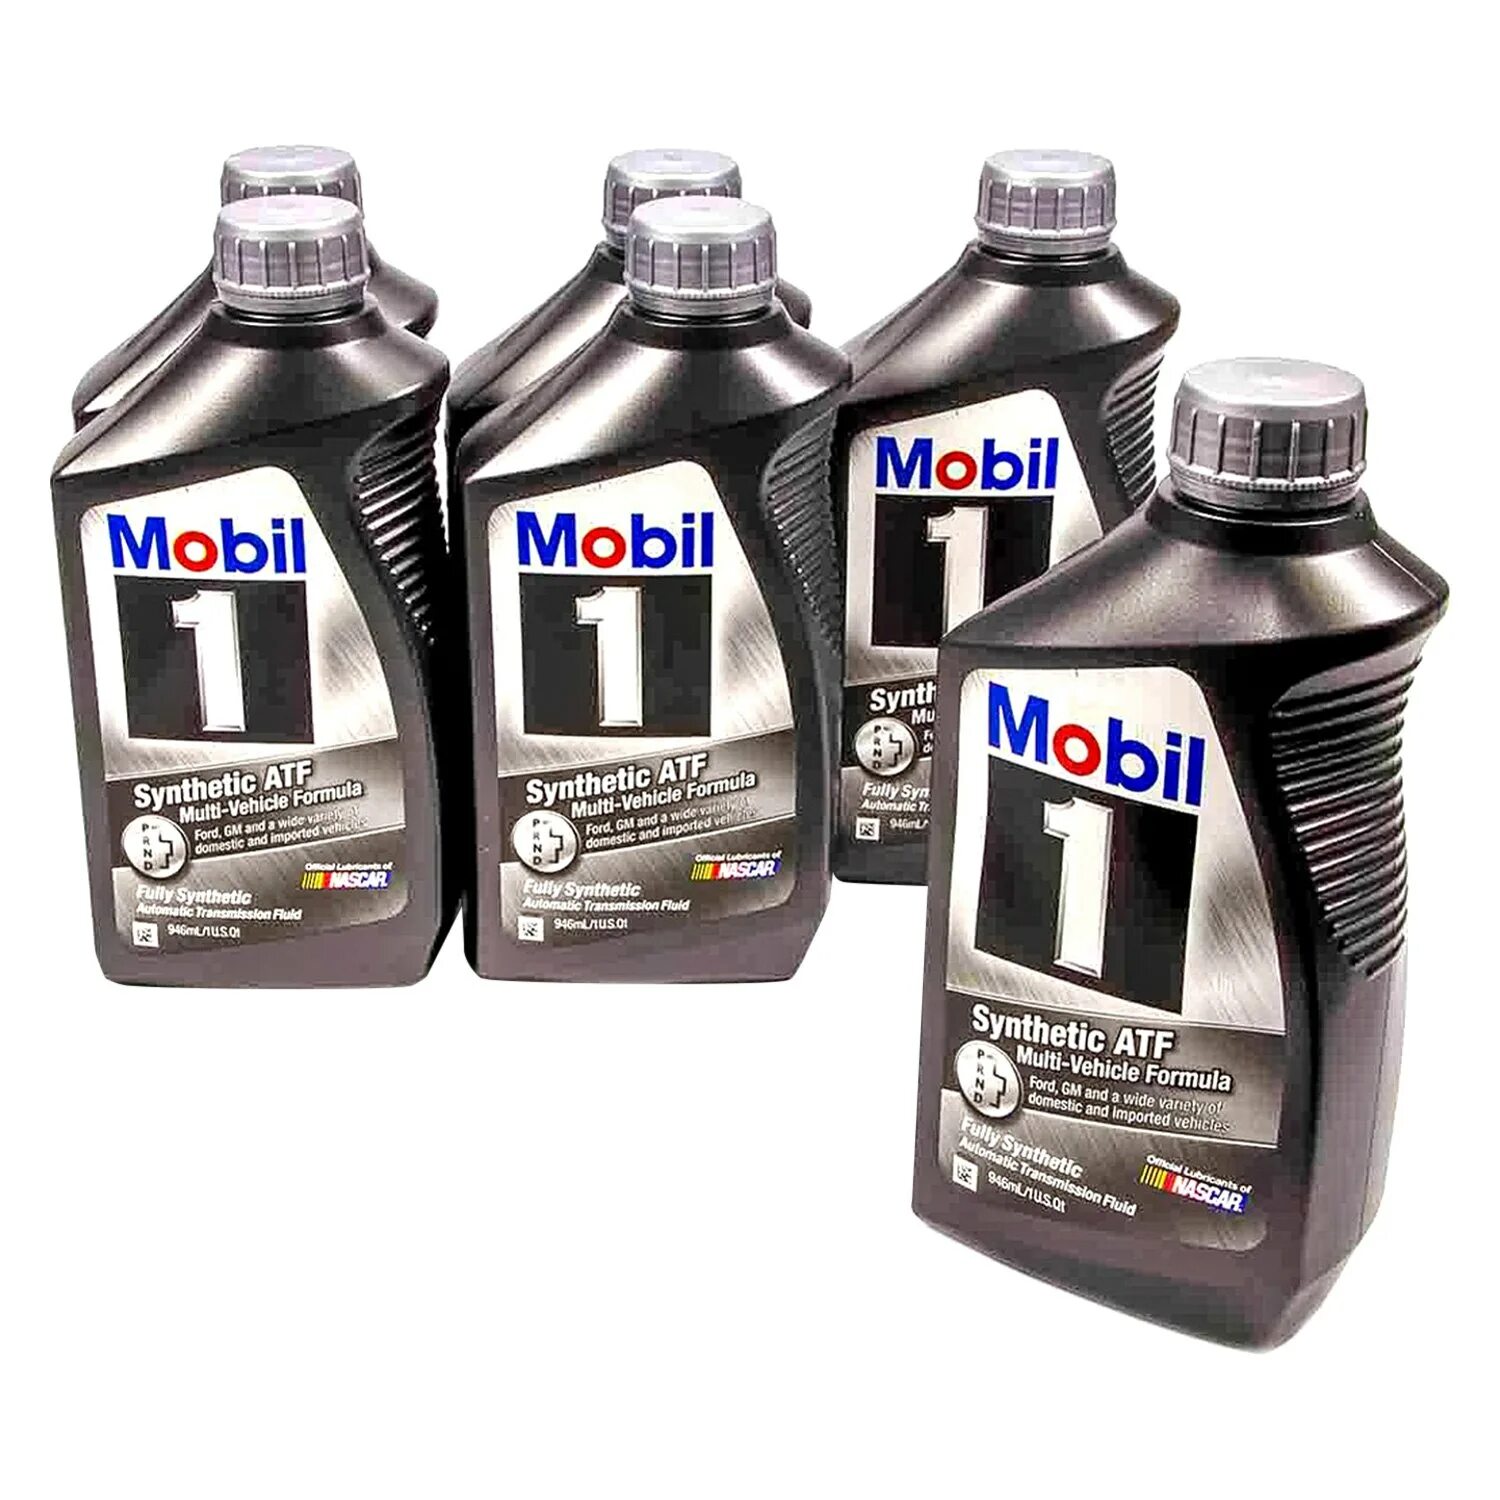 Mobil 1 atf. Mobil 1 Synthetic АТФ. Mobil 1 Full Synthetic ATF. Mobil 1 Synthetic ATF 152582. Mobil 380 ATF.